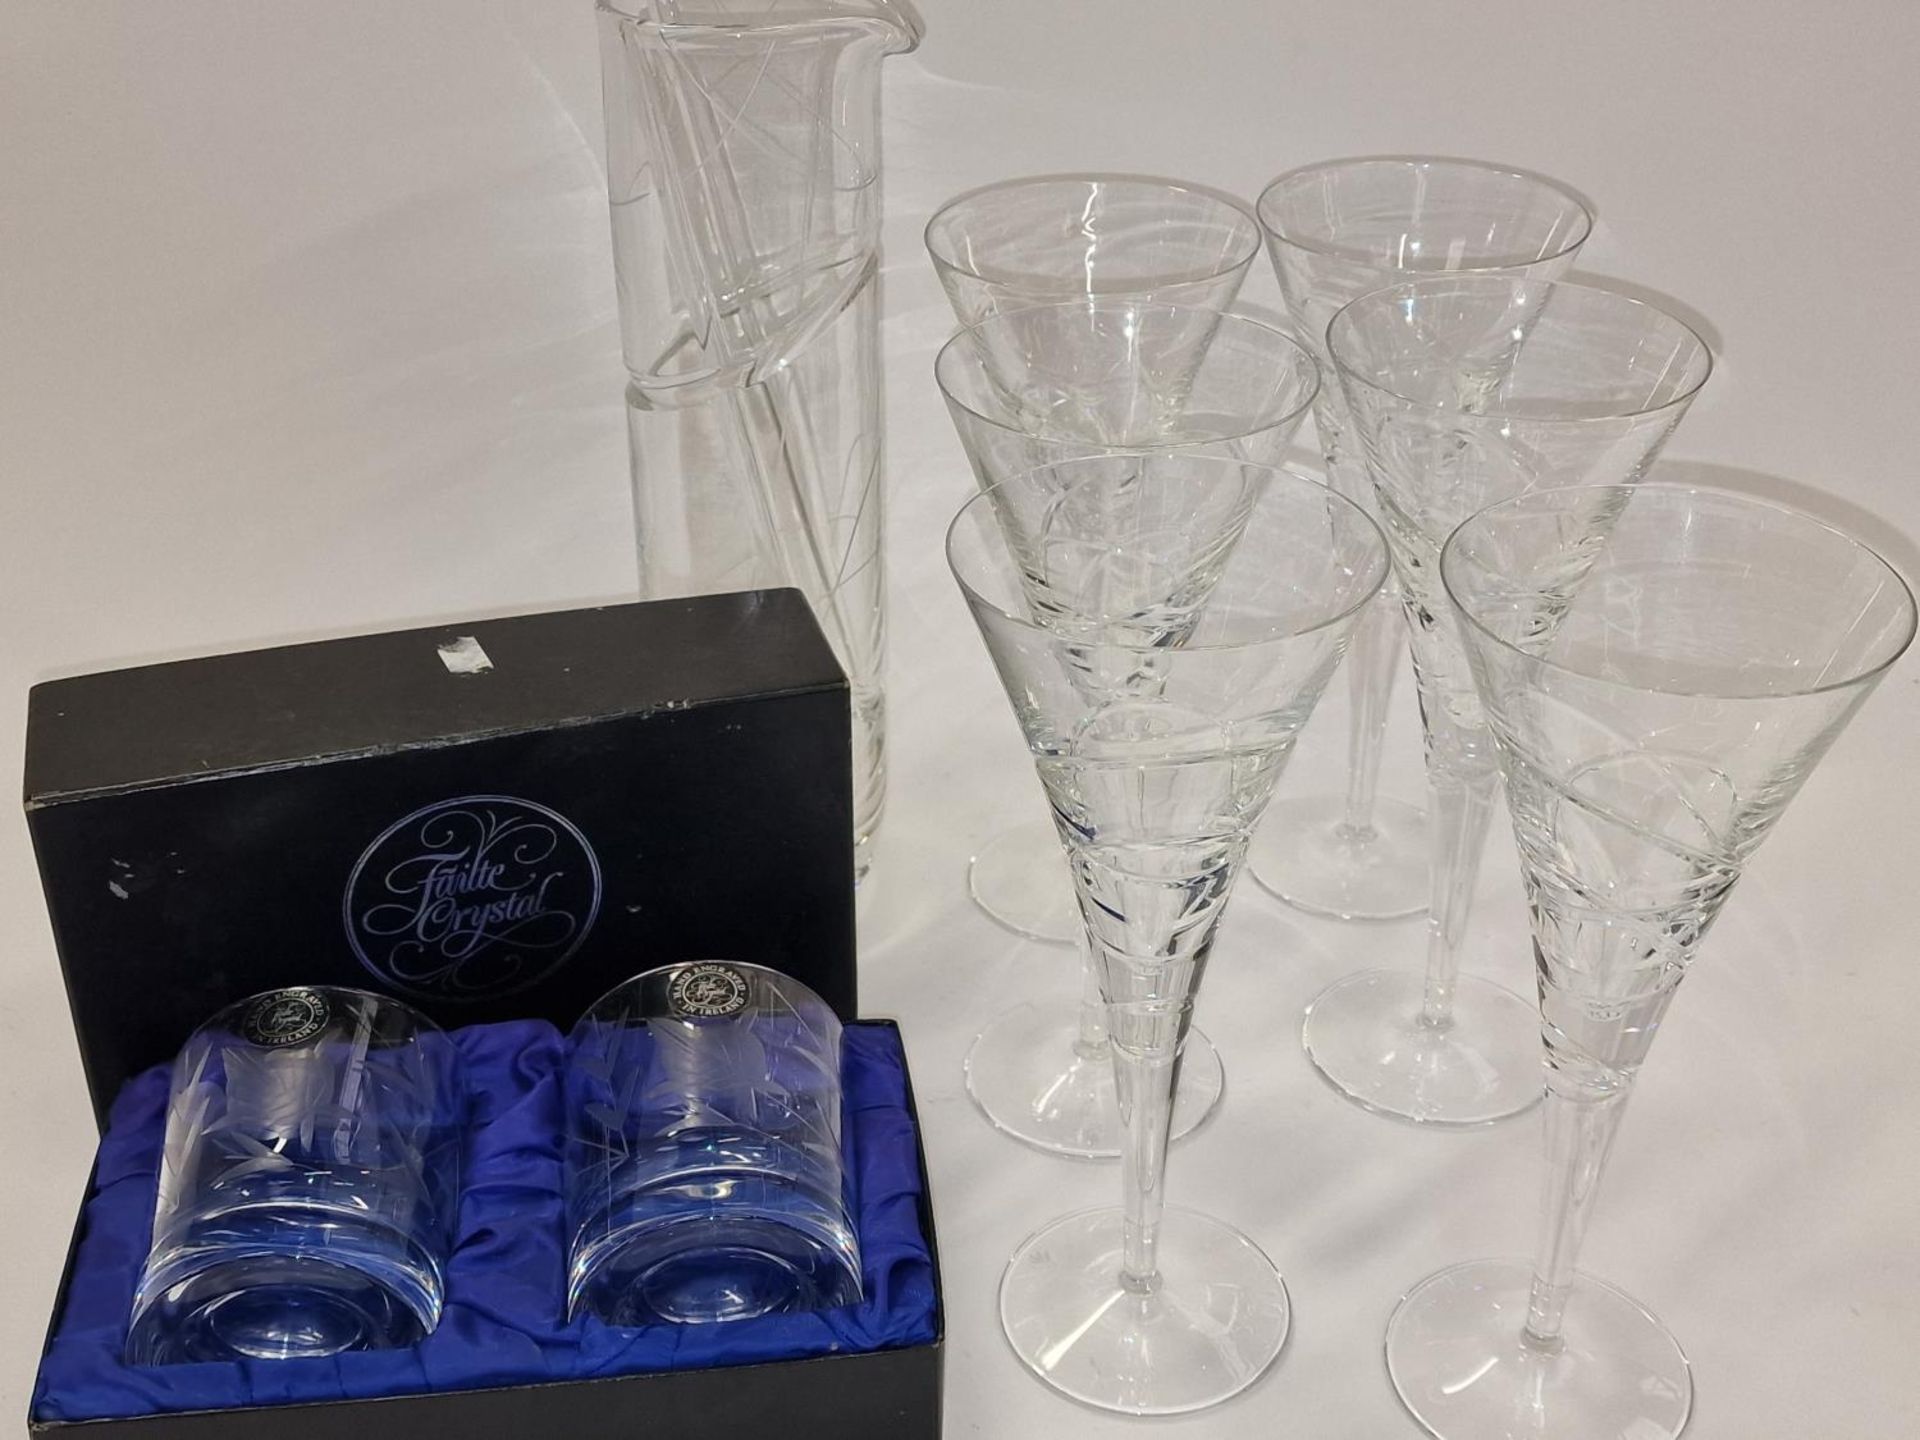 A set of 6 Royal Doulton crystal Luna wine glasses, a Royal Doulton wine carafe and a boxed pair - Image 2 of 4